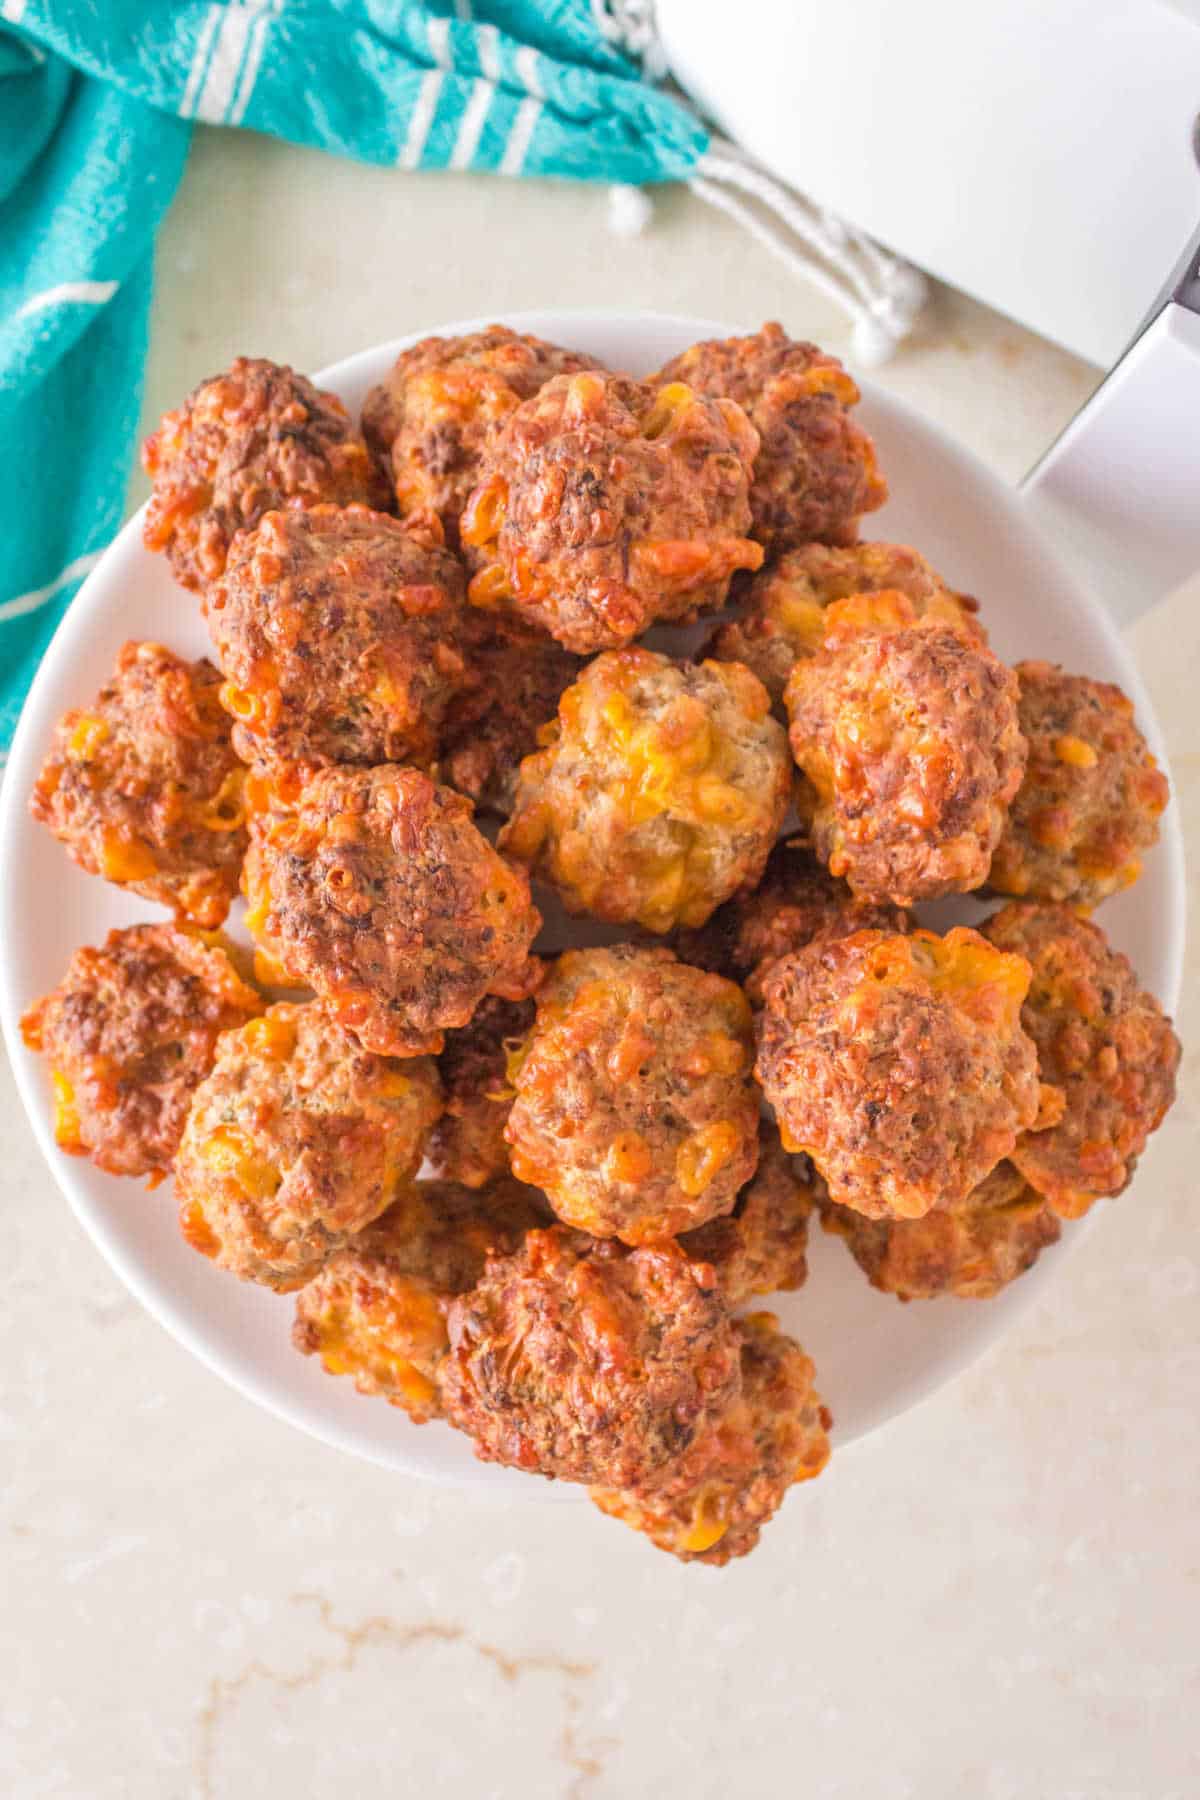 Air fryer bisquick sausage balls on a plate.